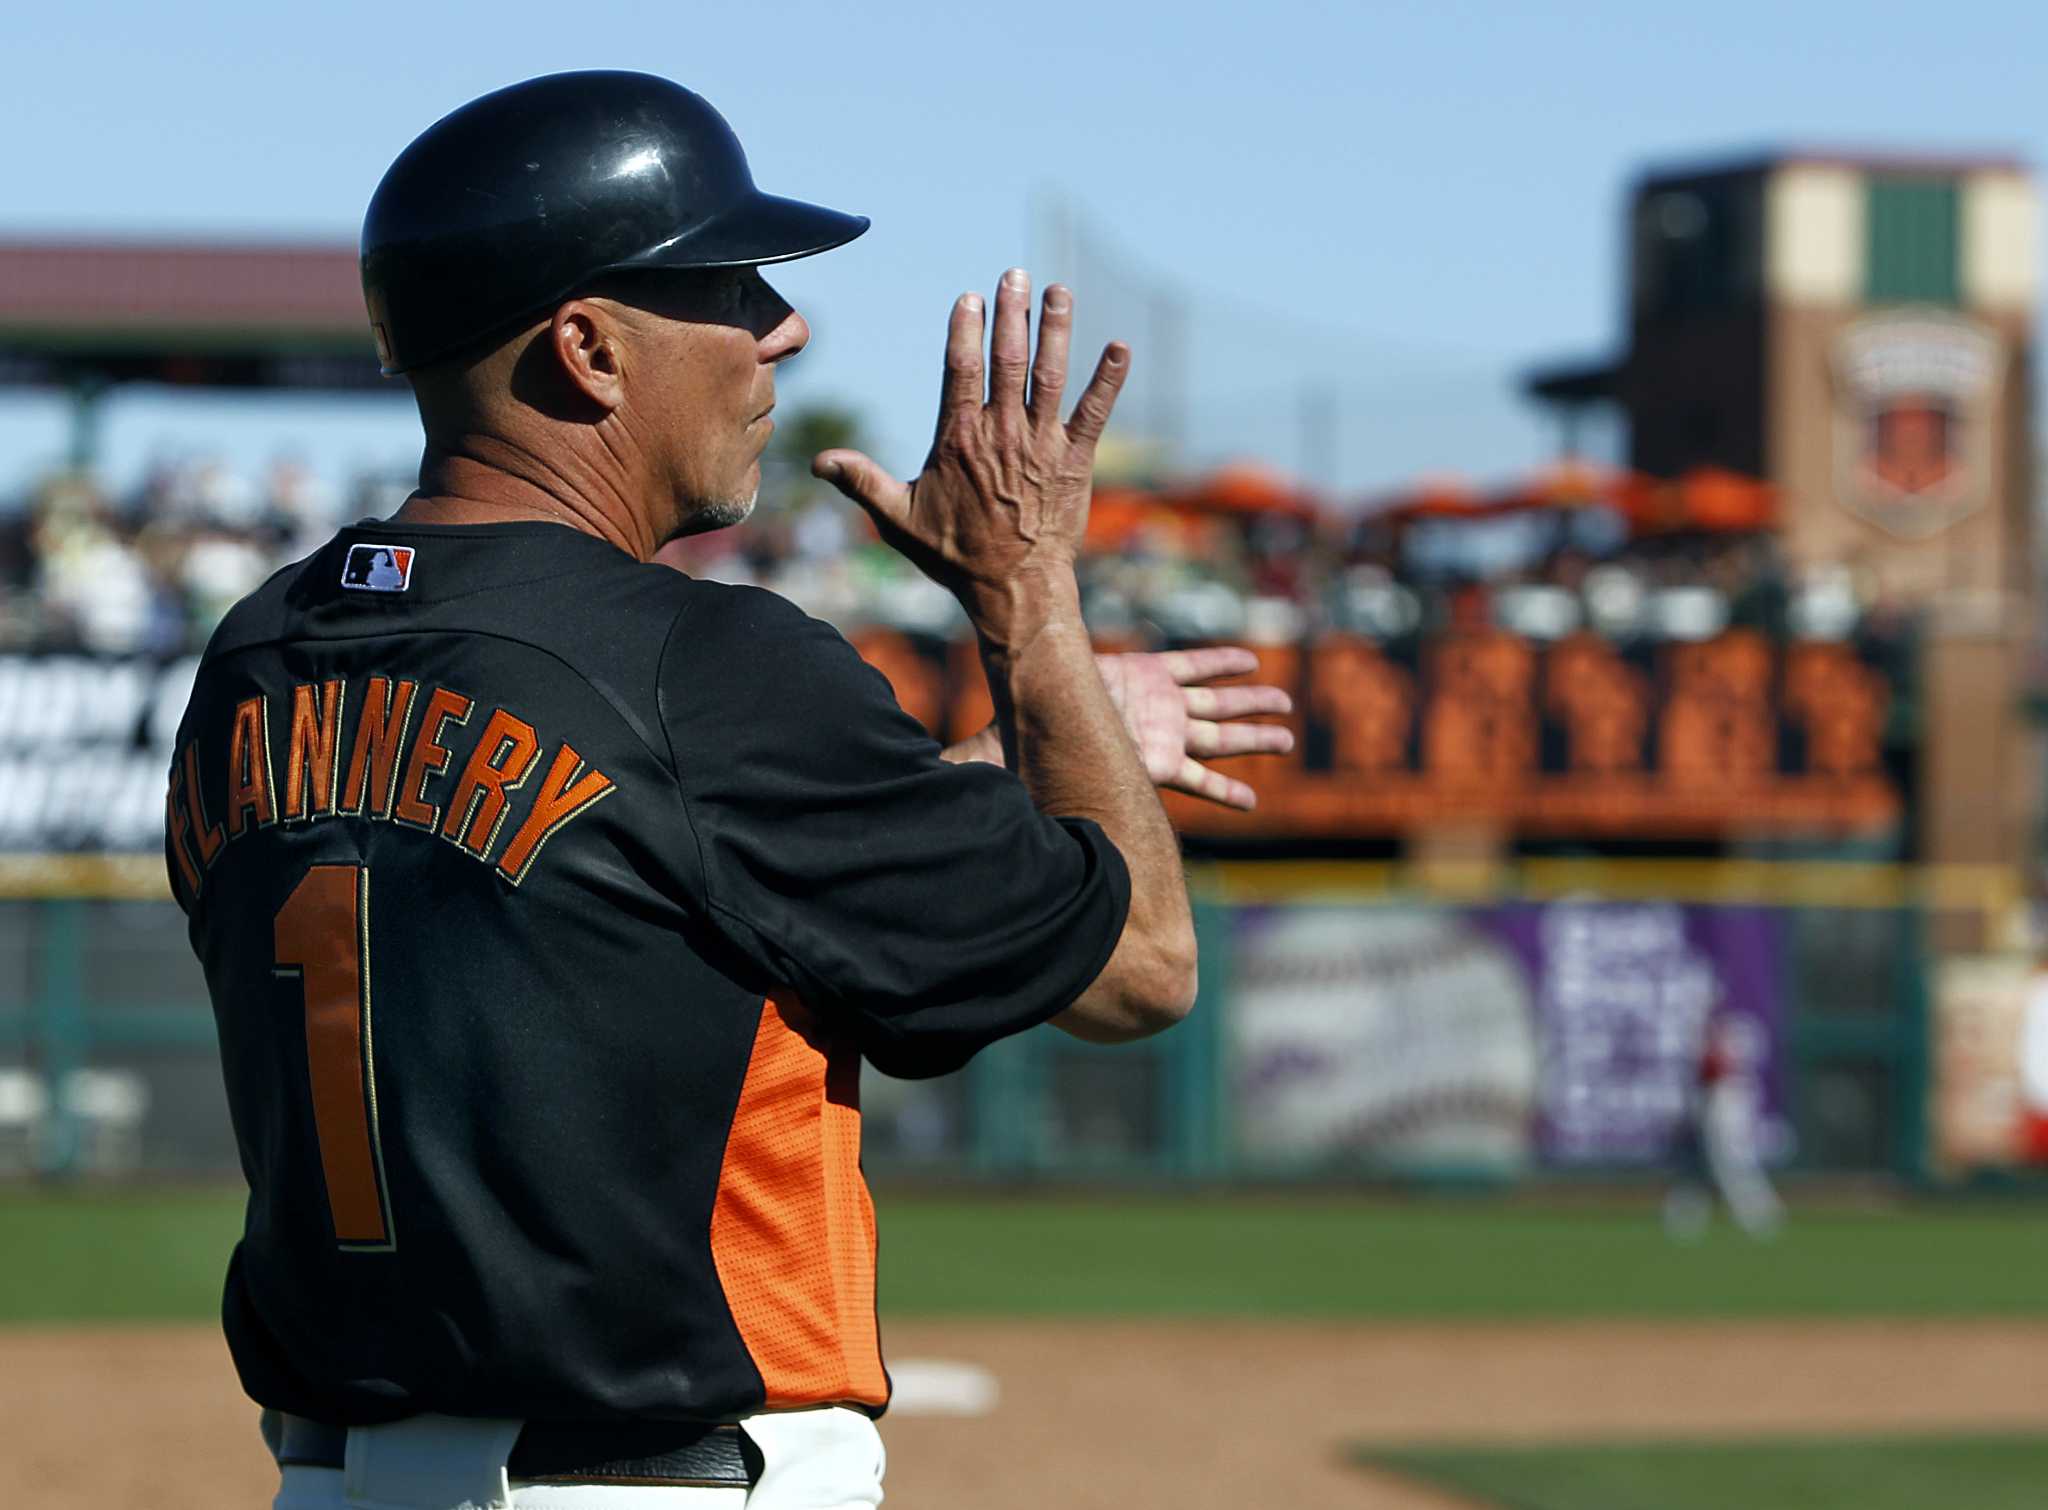 For ex-Giants coach Tim Flannery, MLB's new pitch clock strikes chord